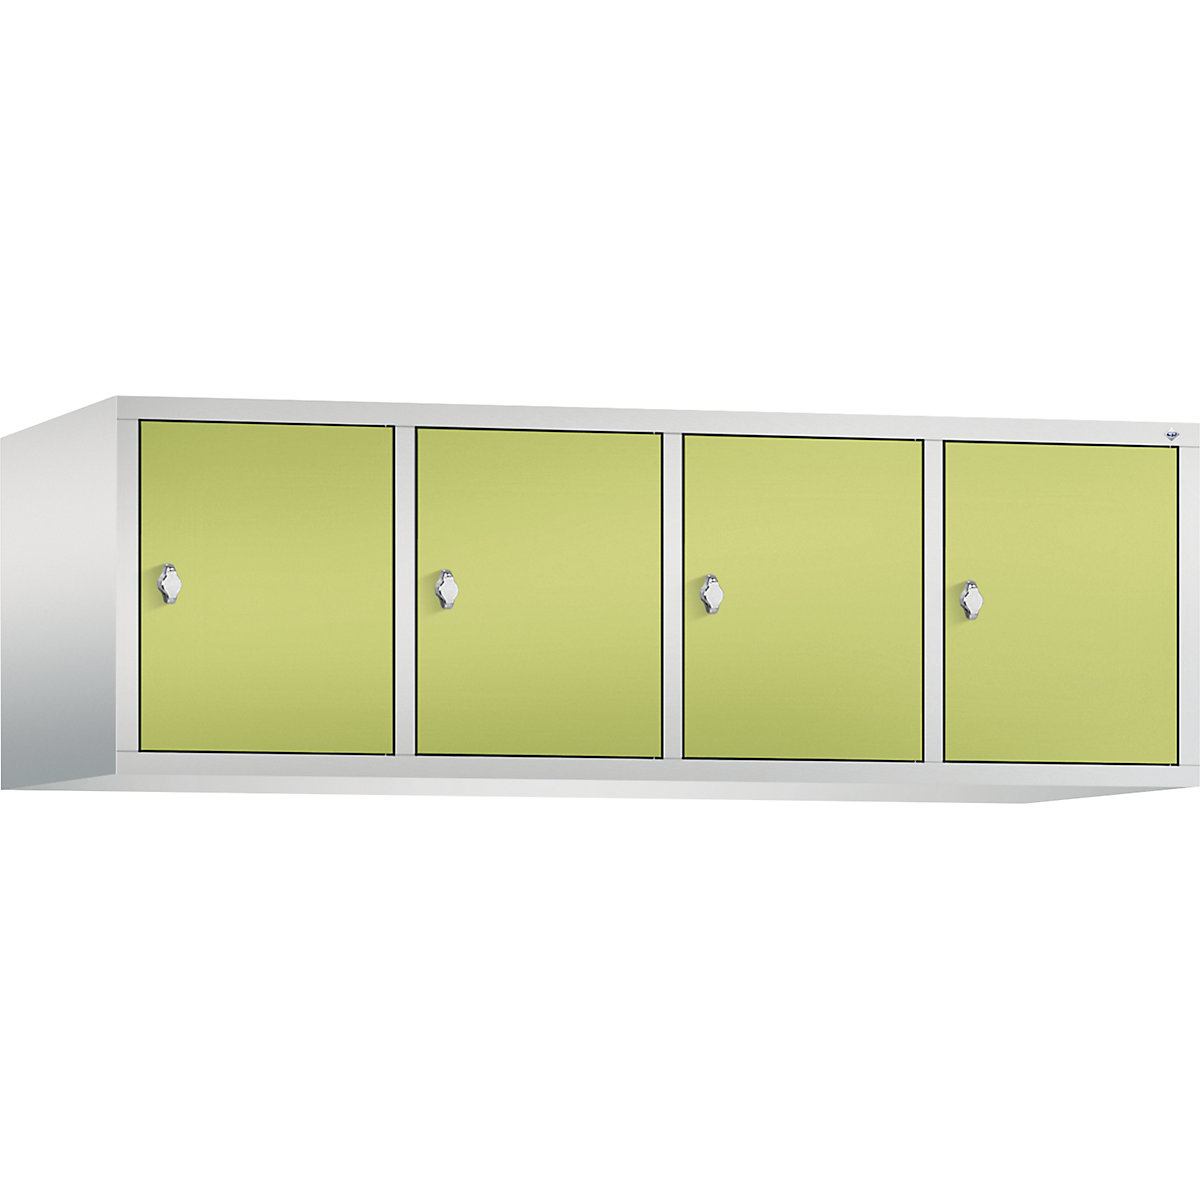 CLASSIC add-on cupboard – C+P, 4 compartments, compartment width 400 mm, light grey / viridian green-10